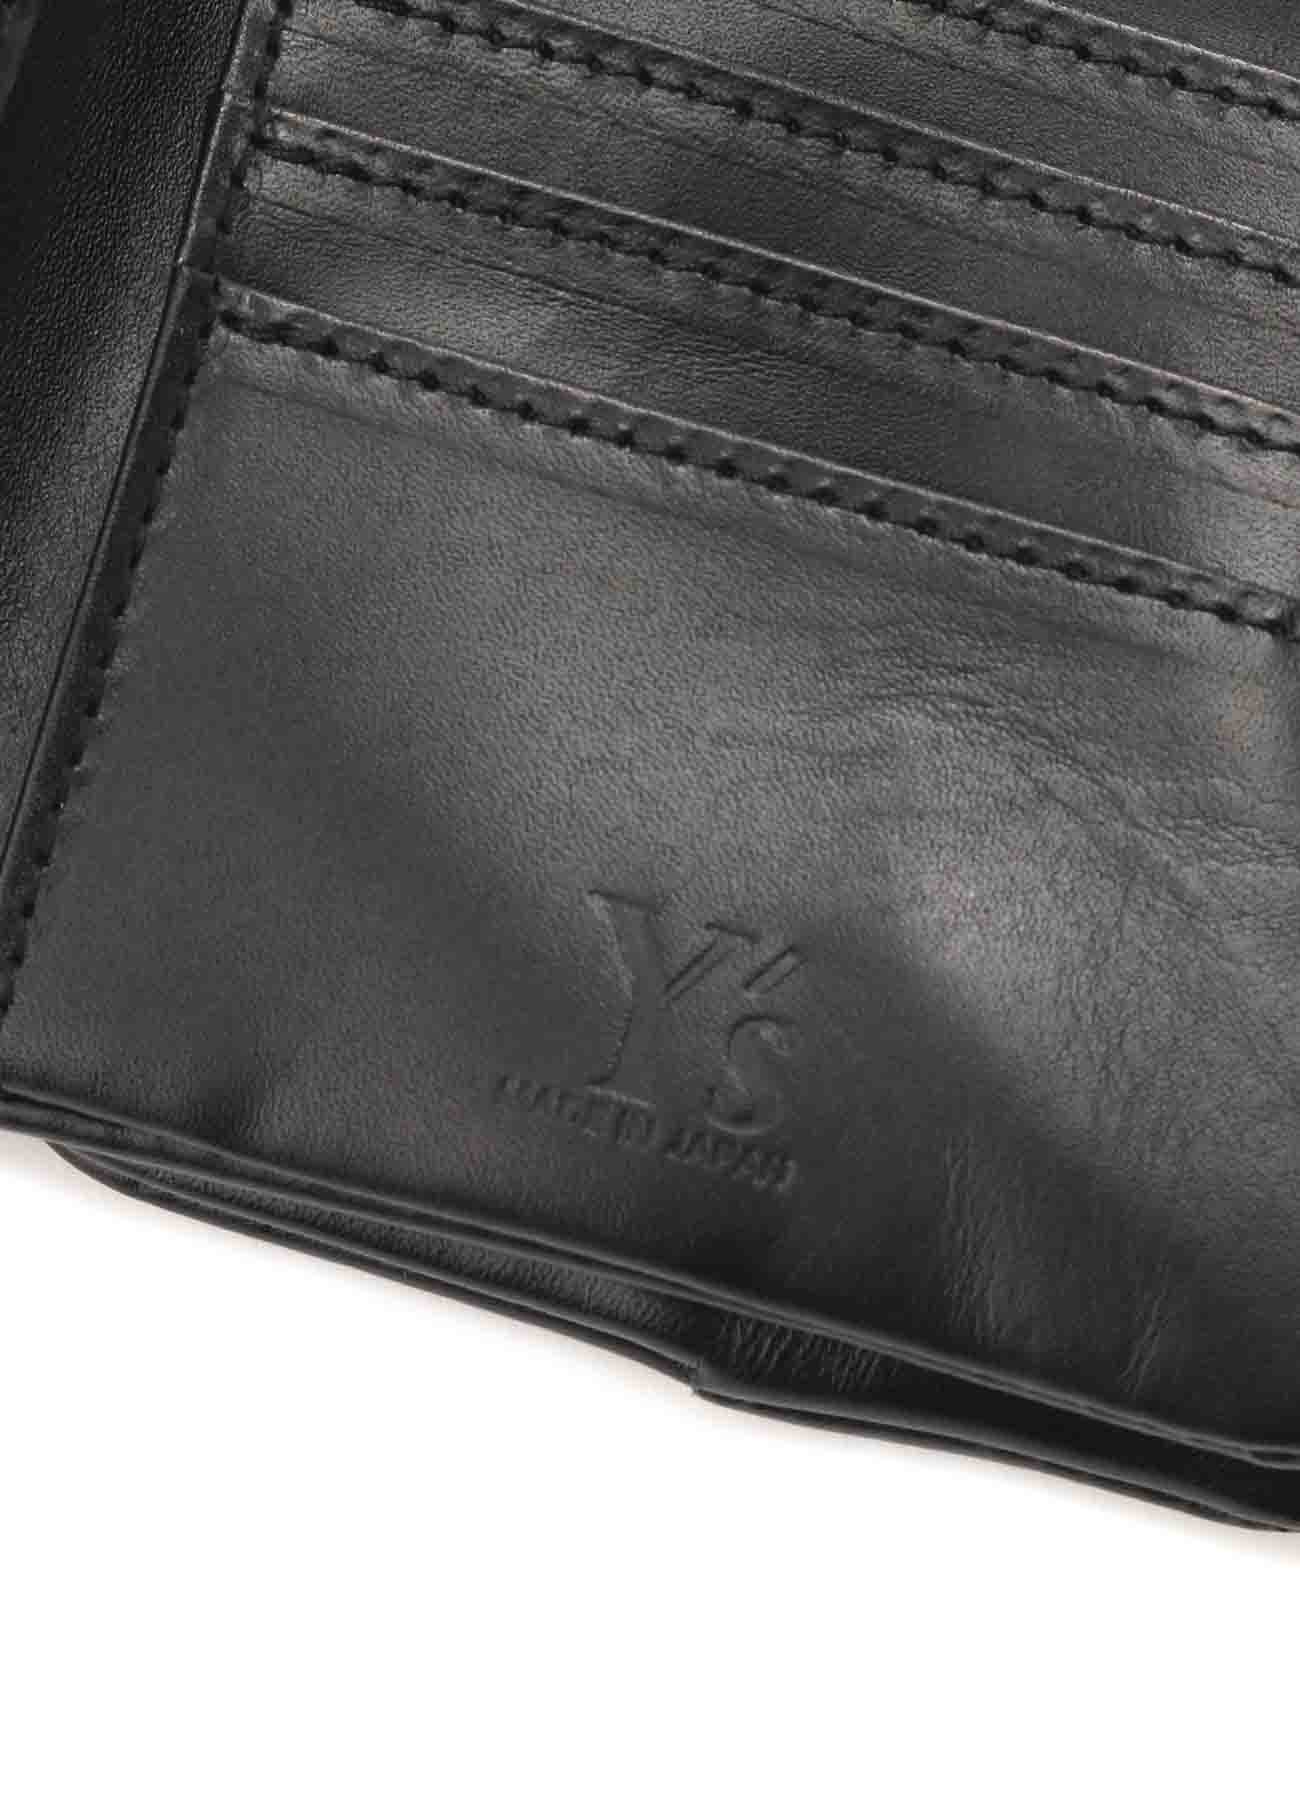 SMOOTH LEATHER FRAME WALLET